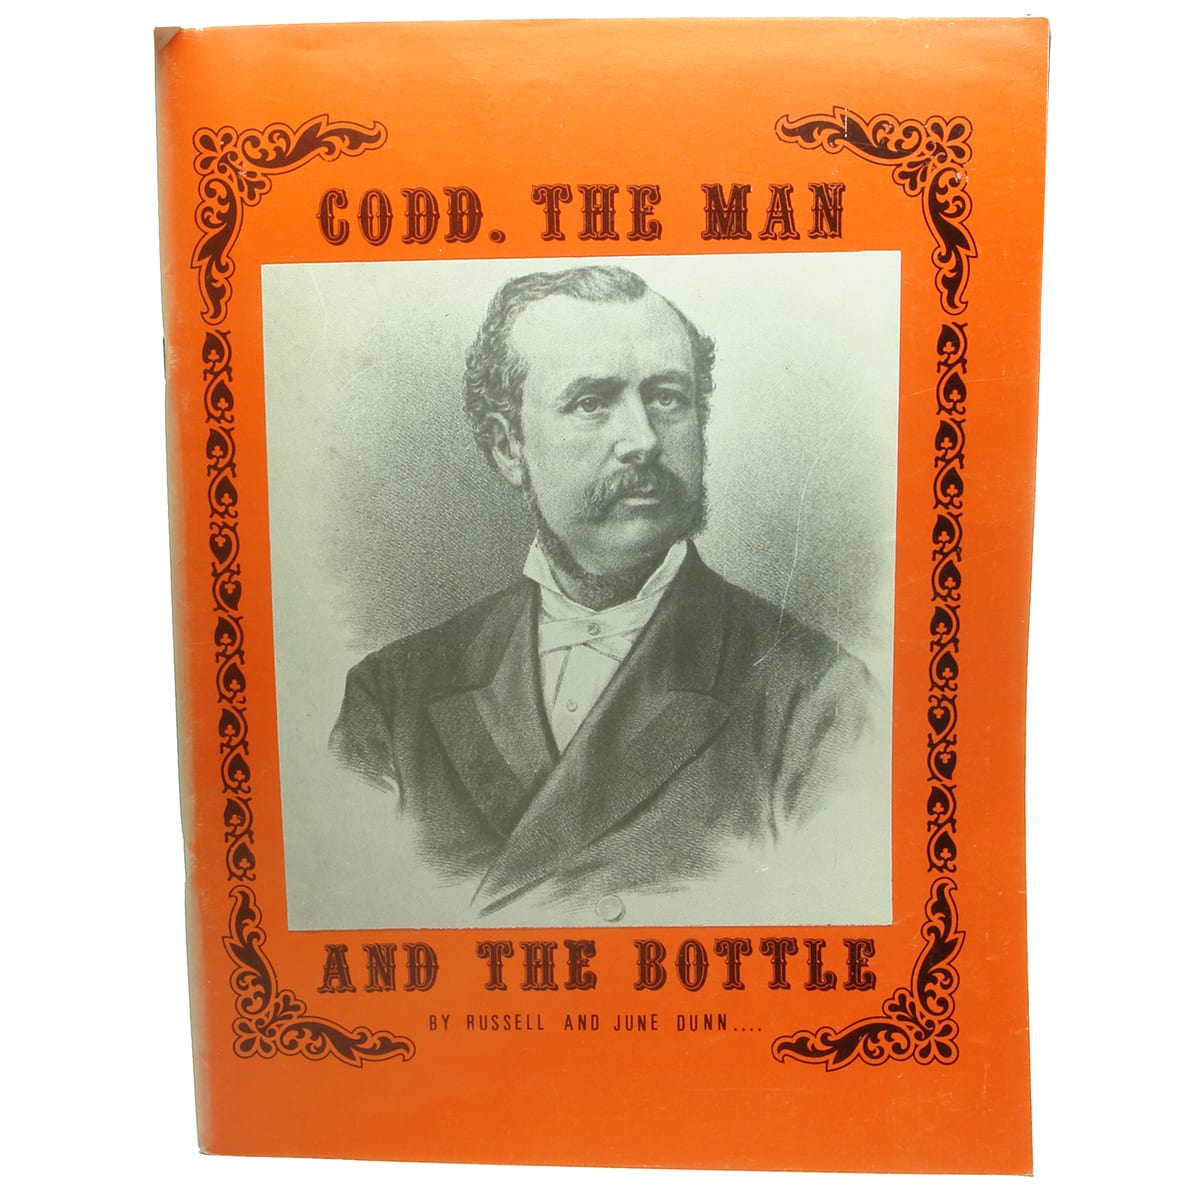 Book. Codd. The Man and the bottle, by Russell and June Dunn, 1987.